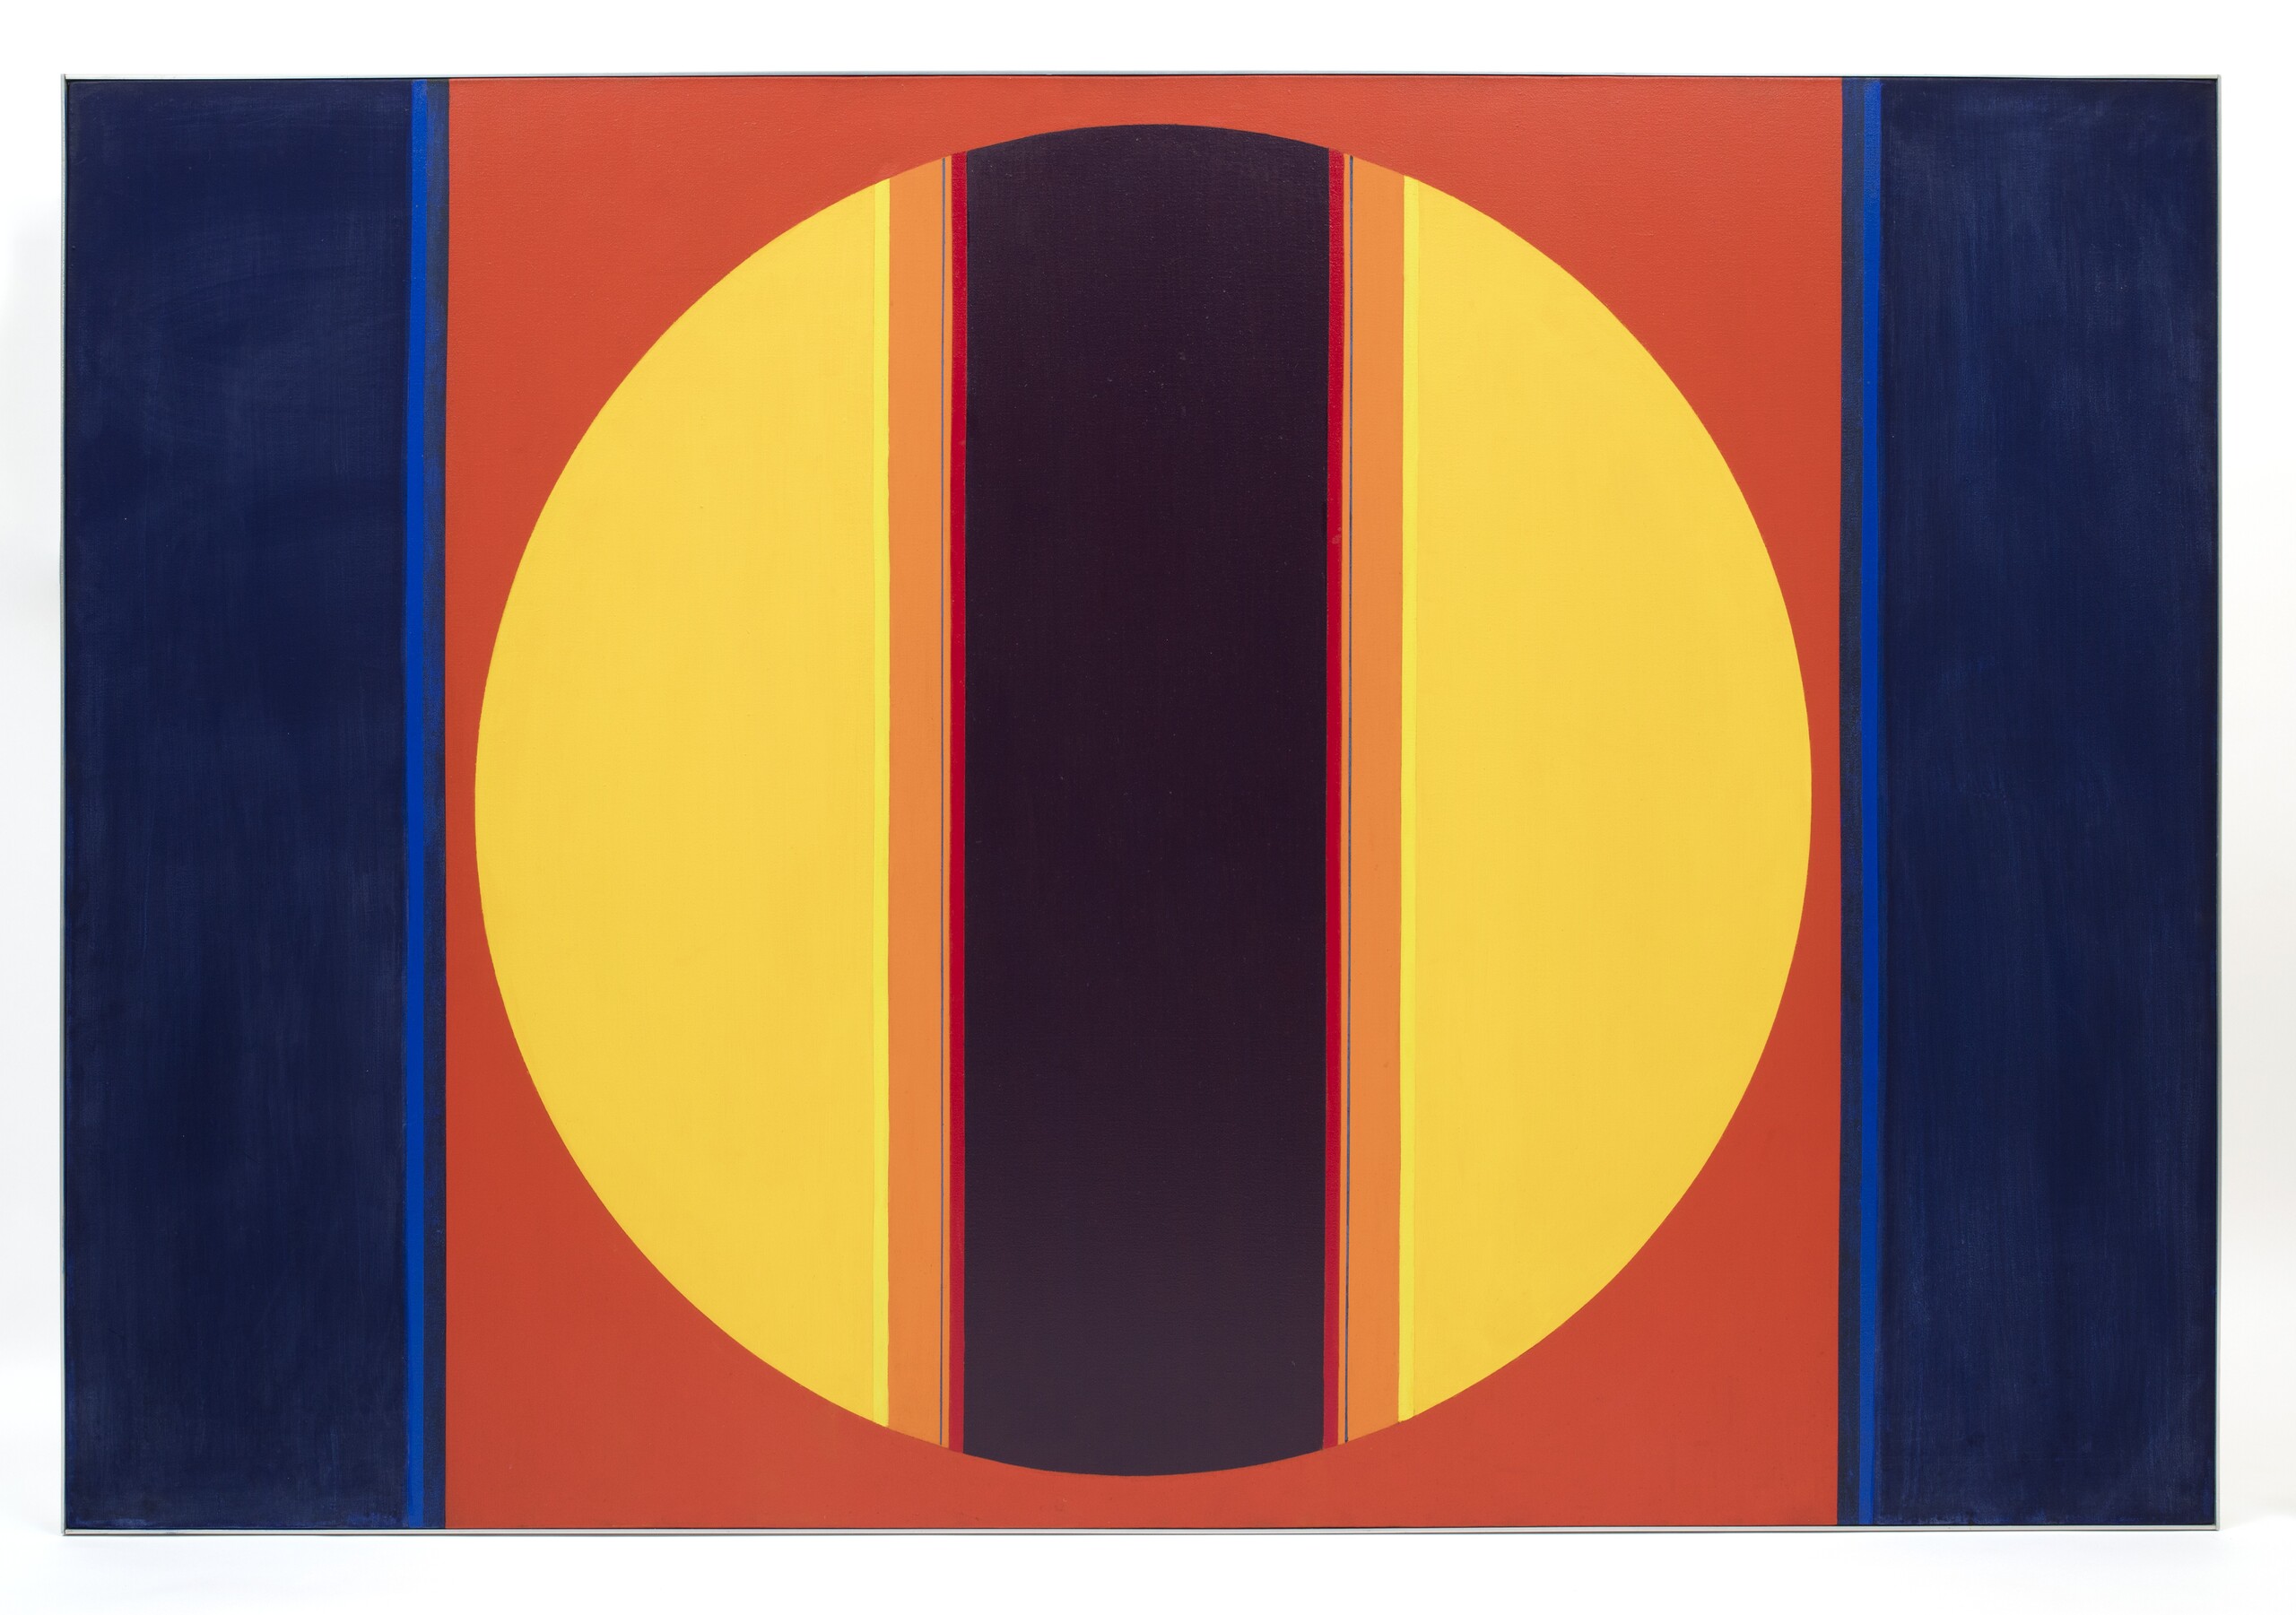 Sydney Ball, <em>Canto no IV</em>, 1965, synthetic polymer paint on canvas, Power Collection PW1987.10 © Estate of Sydney Ball.